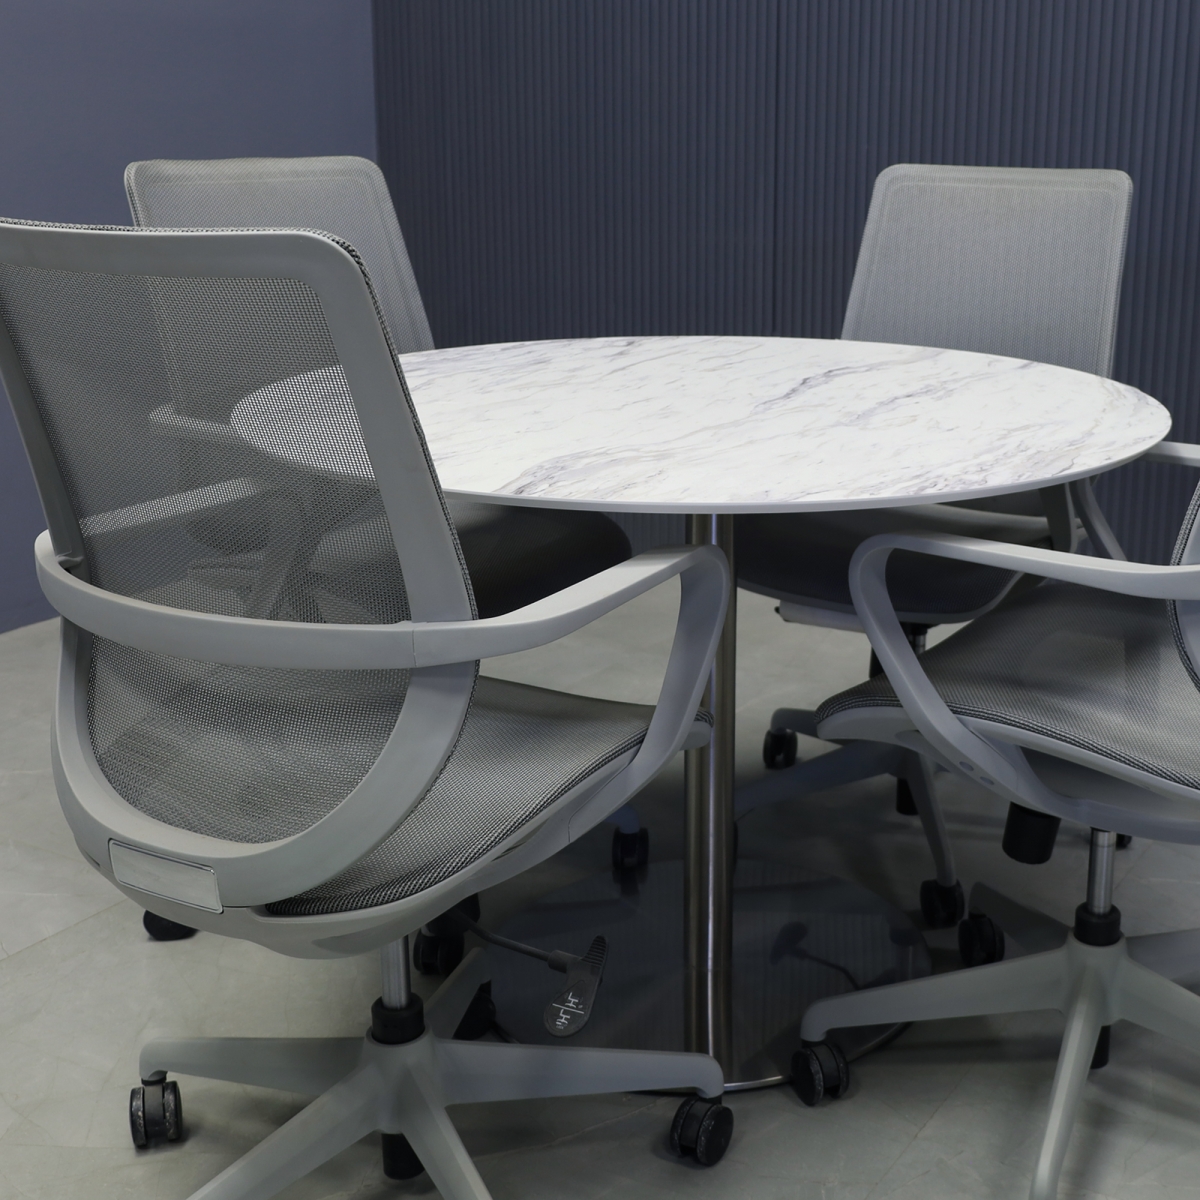 California Round Conference Table with Engineered Stone Top